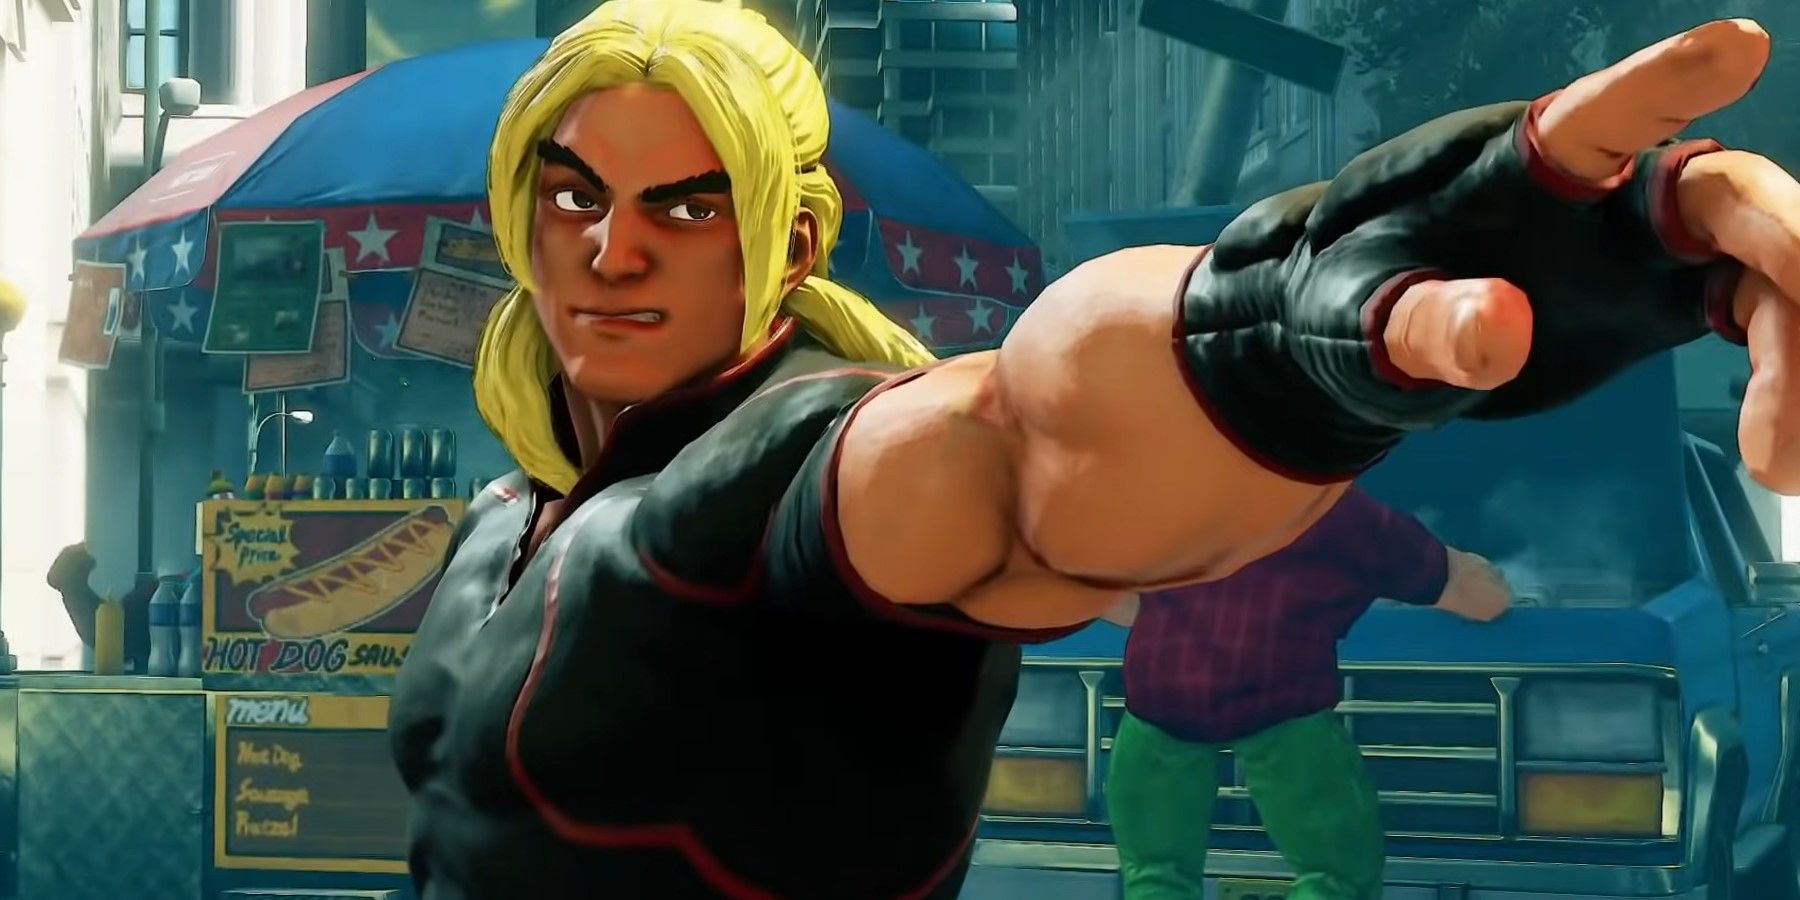 Ken pointing at his opponent with a smug smile